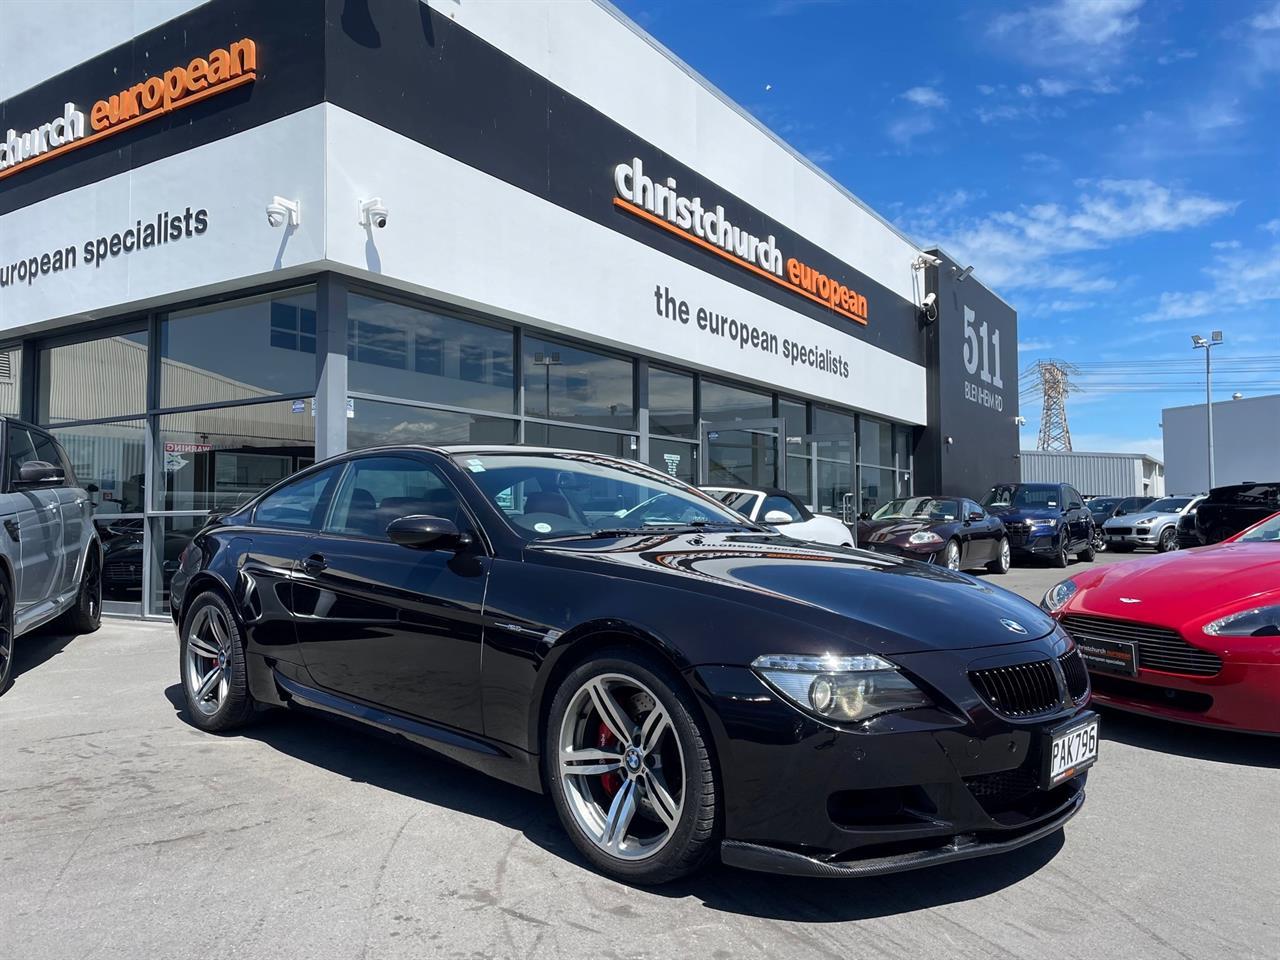 image-0, 2006 BMW M6 5.0 V10 SMG Coupe Carbon Package at Christchurch